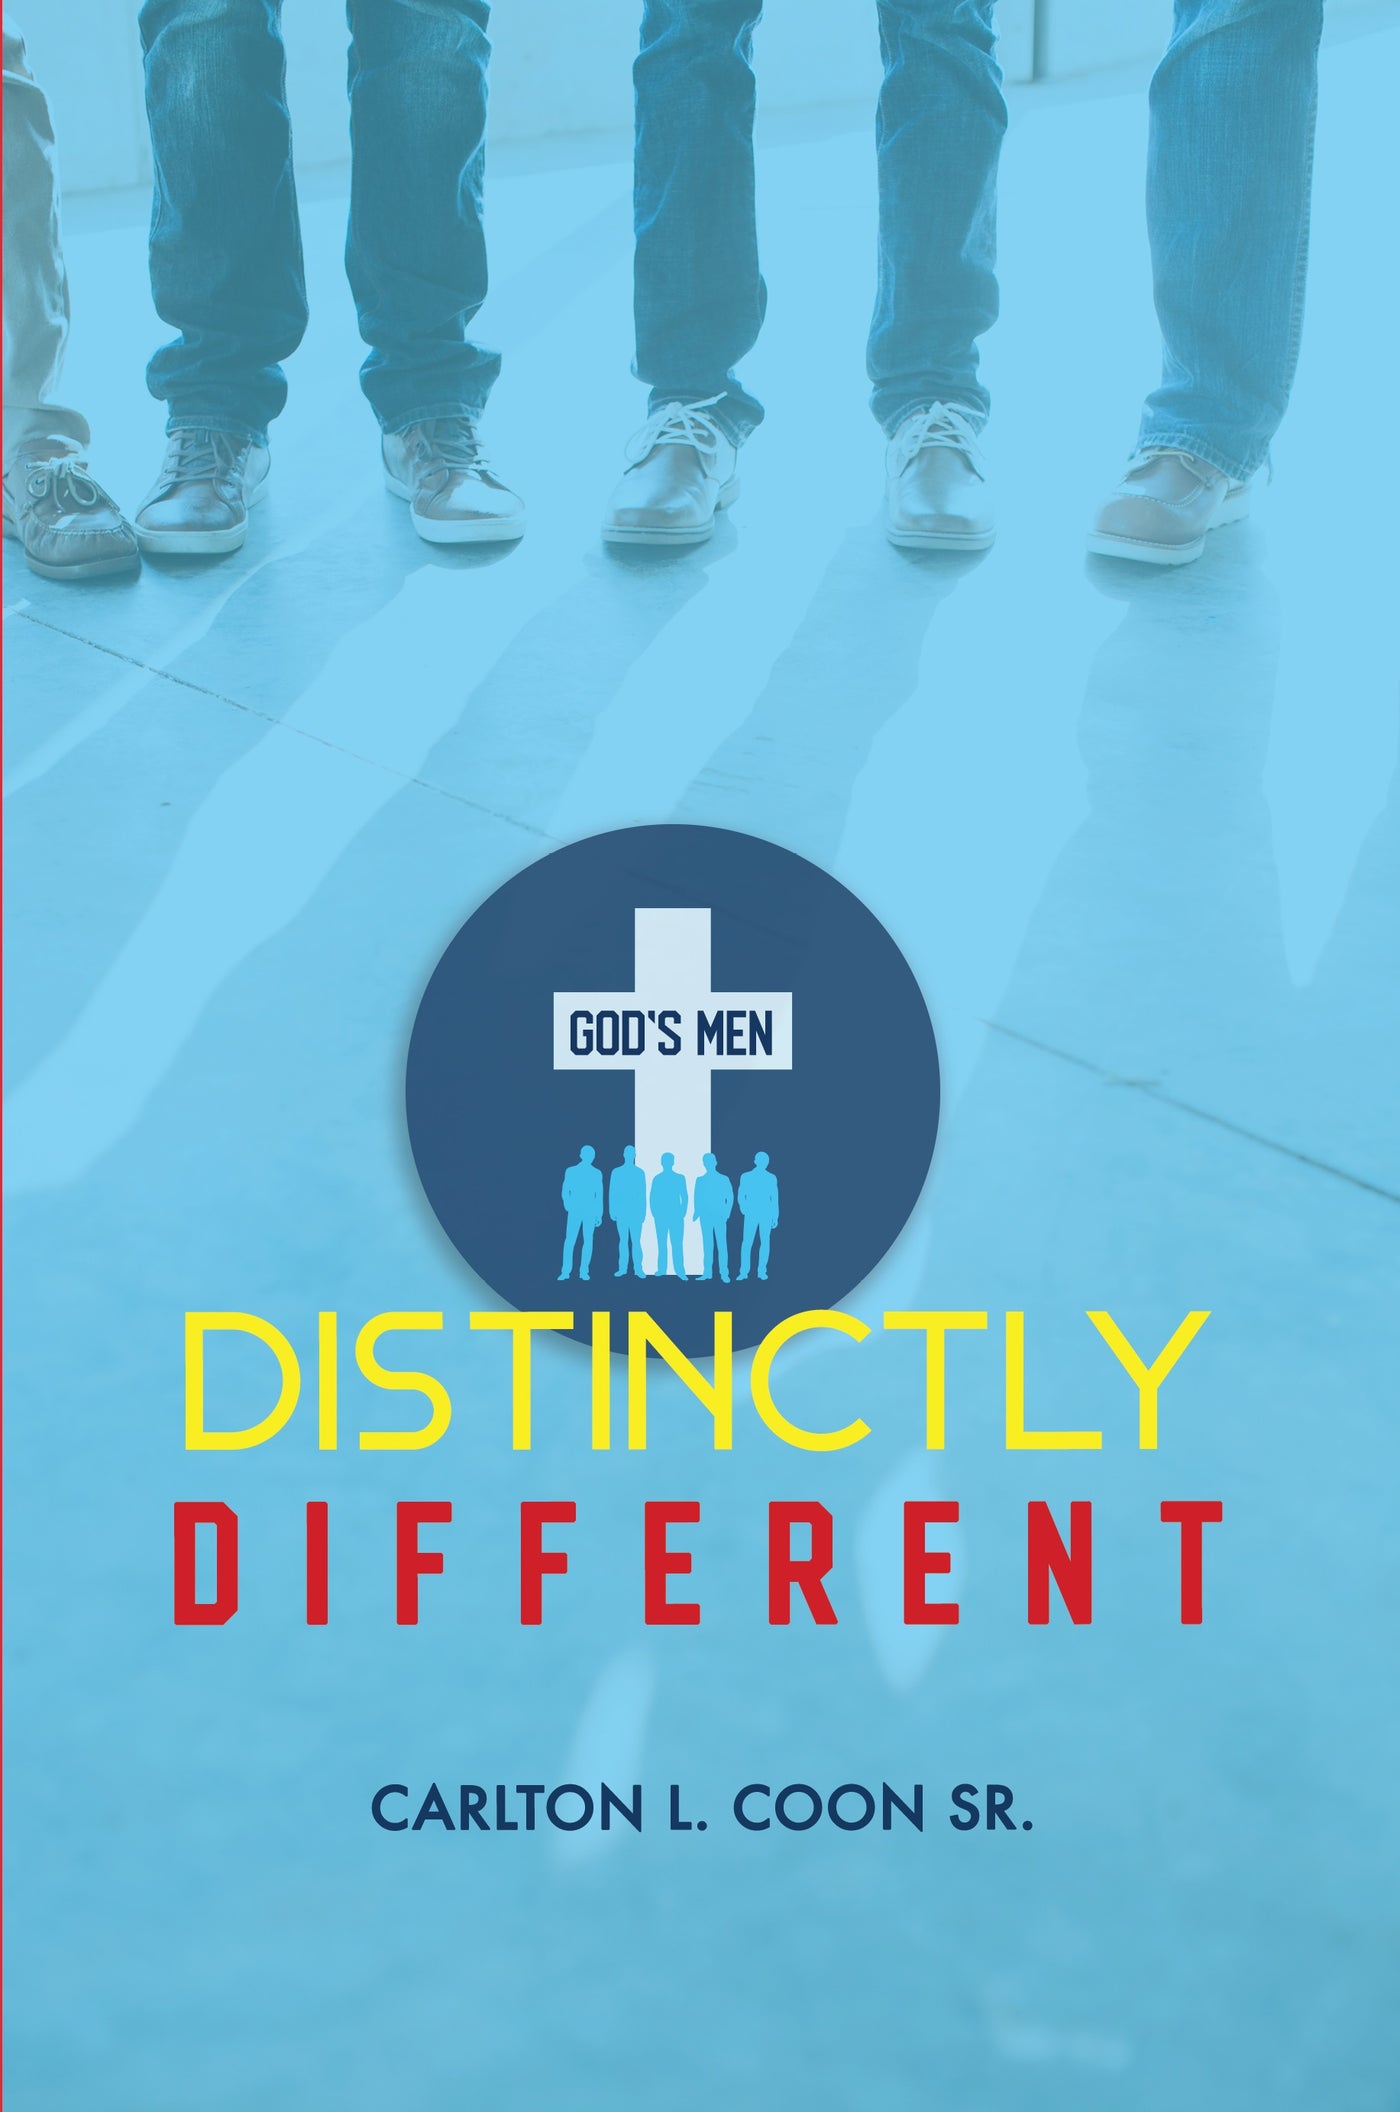 Leader's Guide for Distinctly Different (PDF)